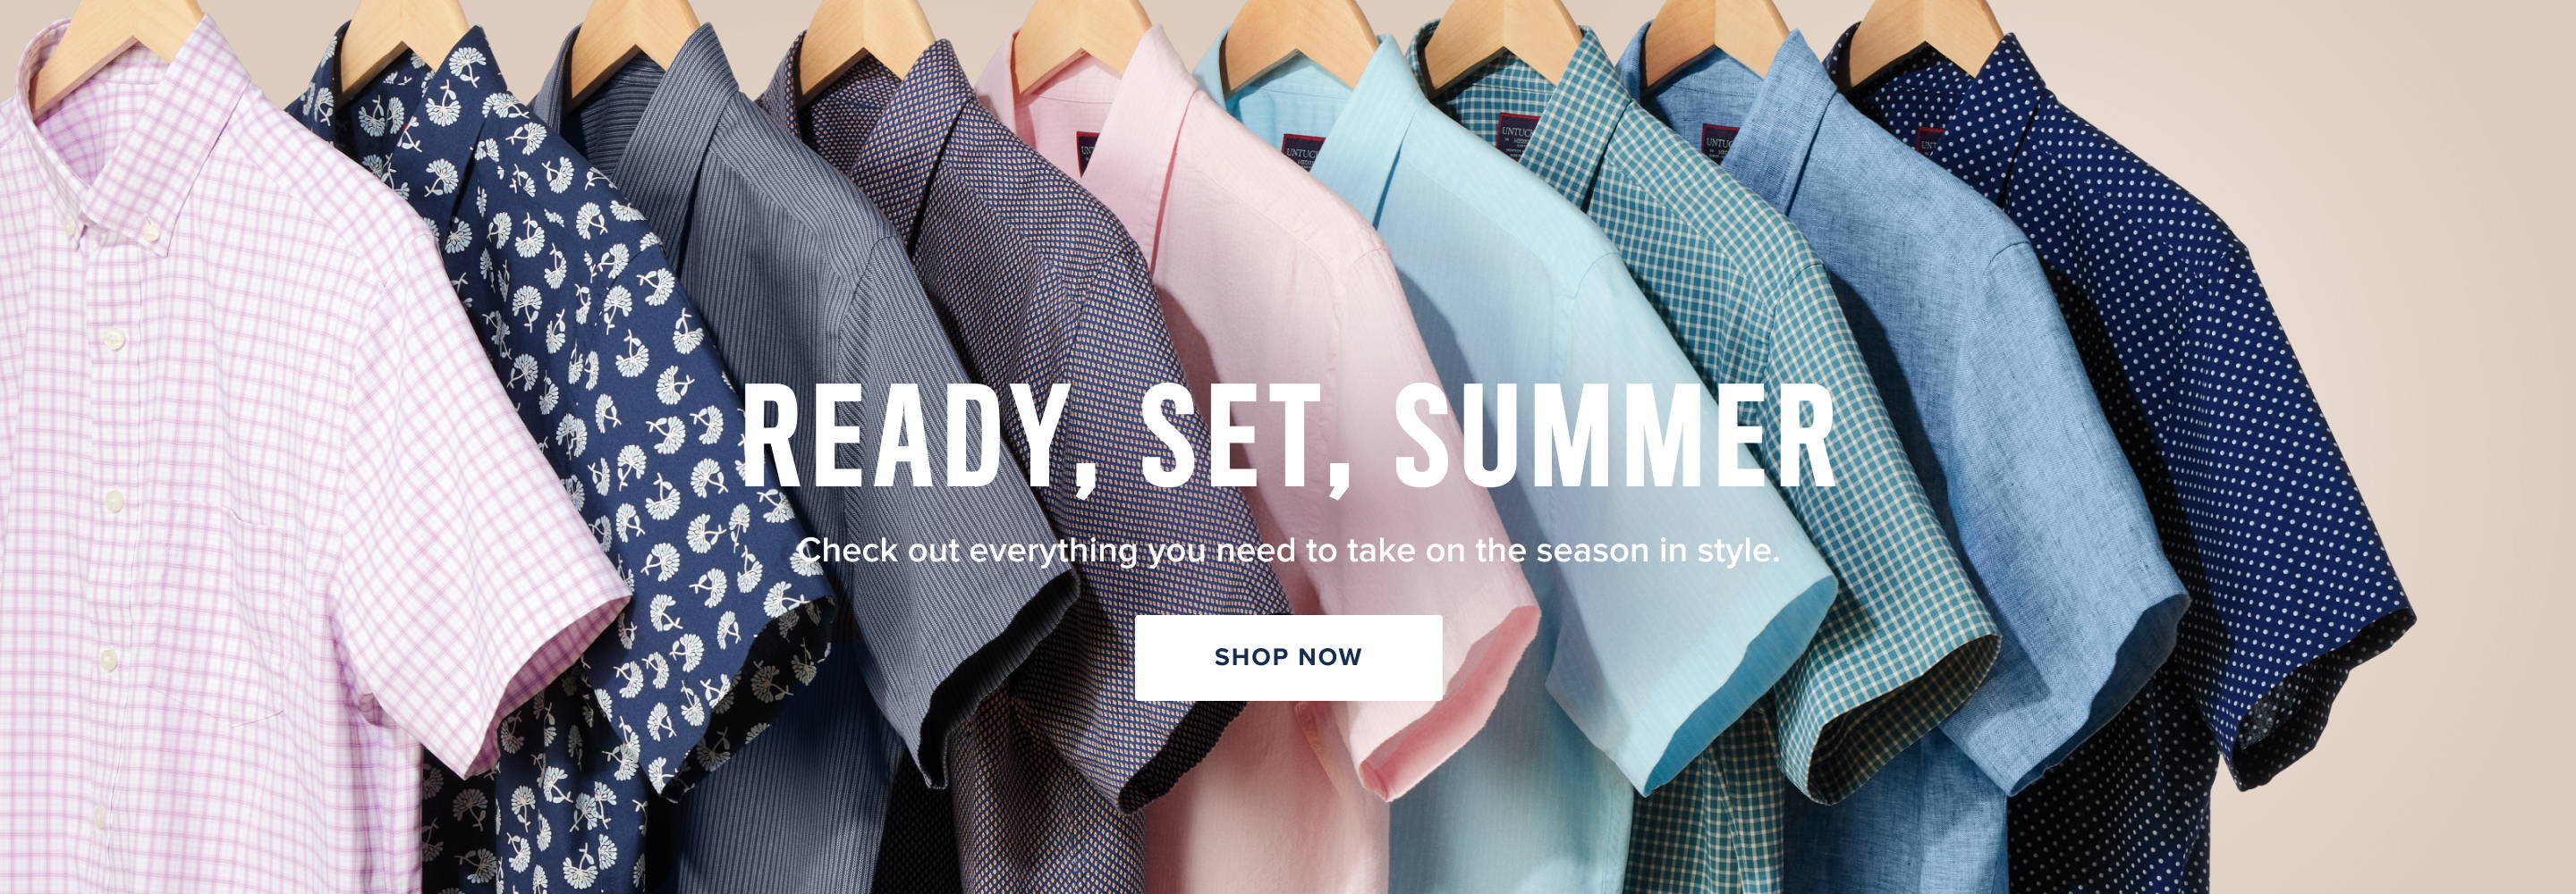 Ready, set, summer. Check out everything you need to take on the season in style.